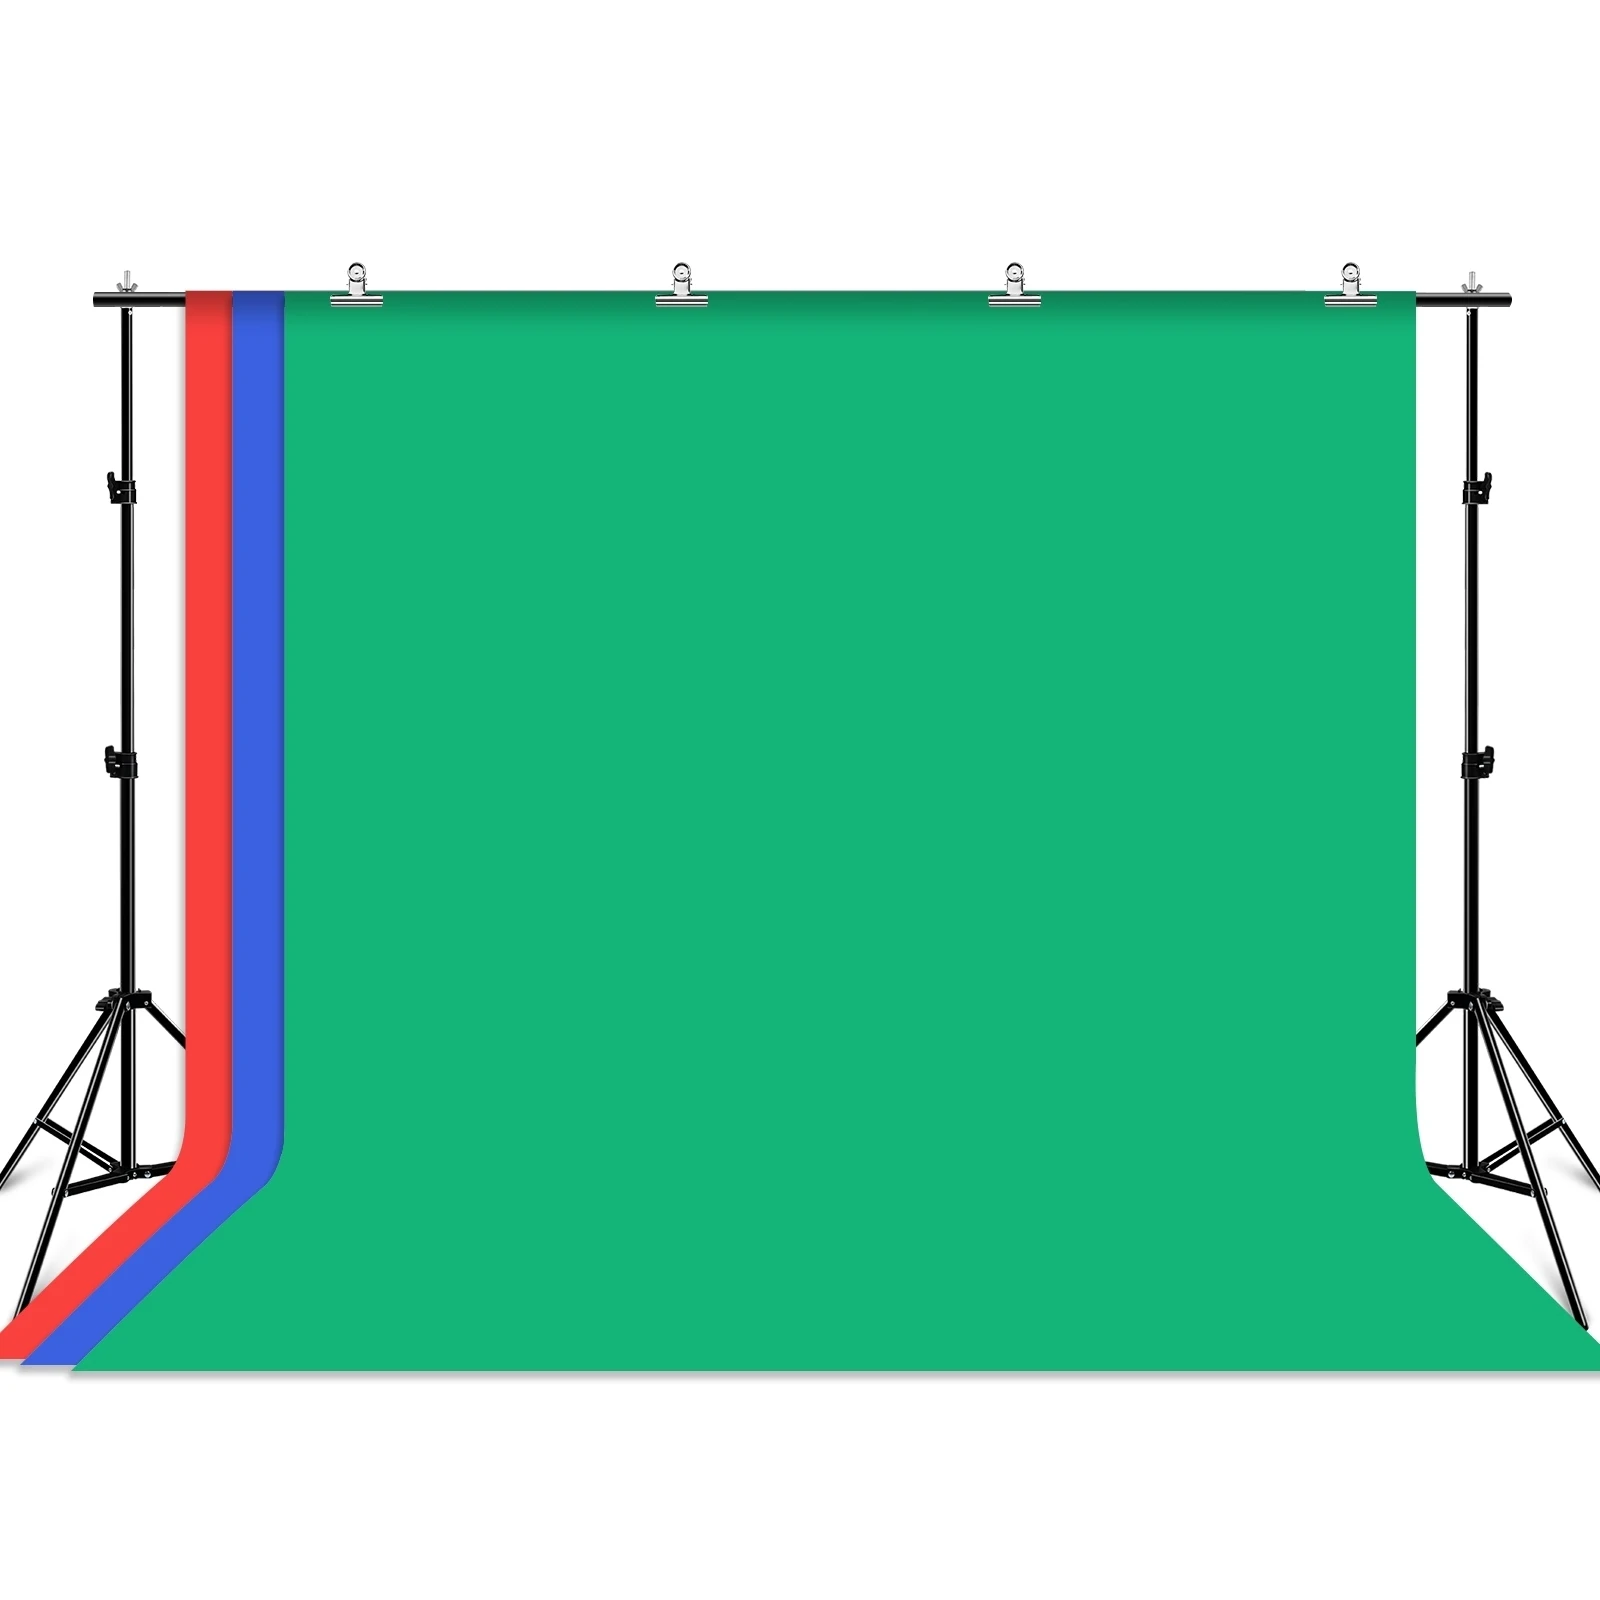 PULUZ LED Ring RGB Light 2.9x2m Photo Studio Background Support Stand Backdrop Crossbar Bracket Kit with Red Blue Green Backdrop